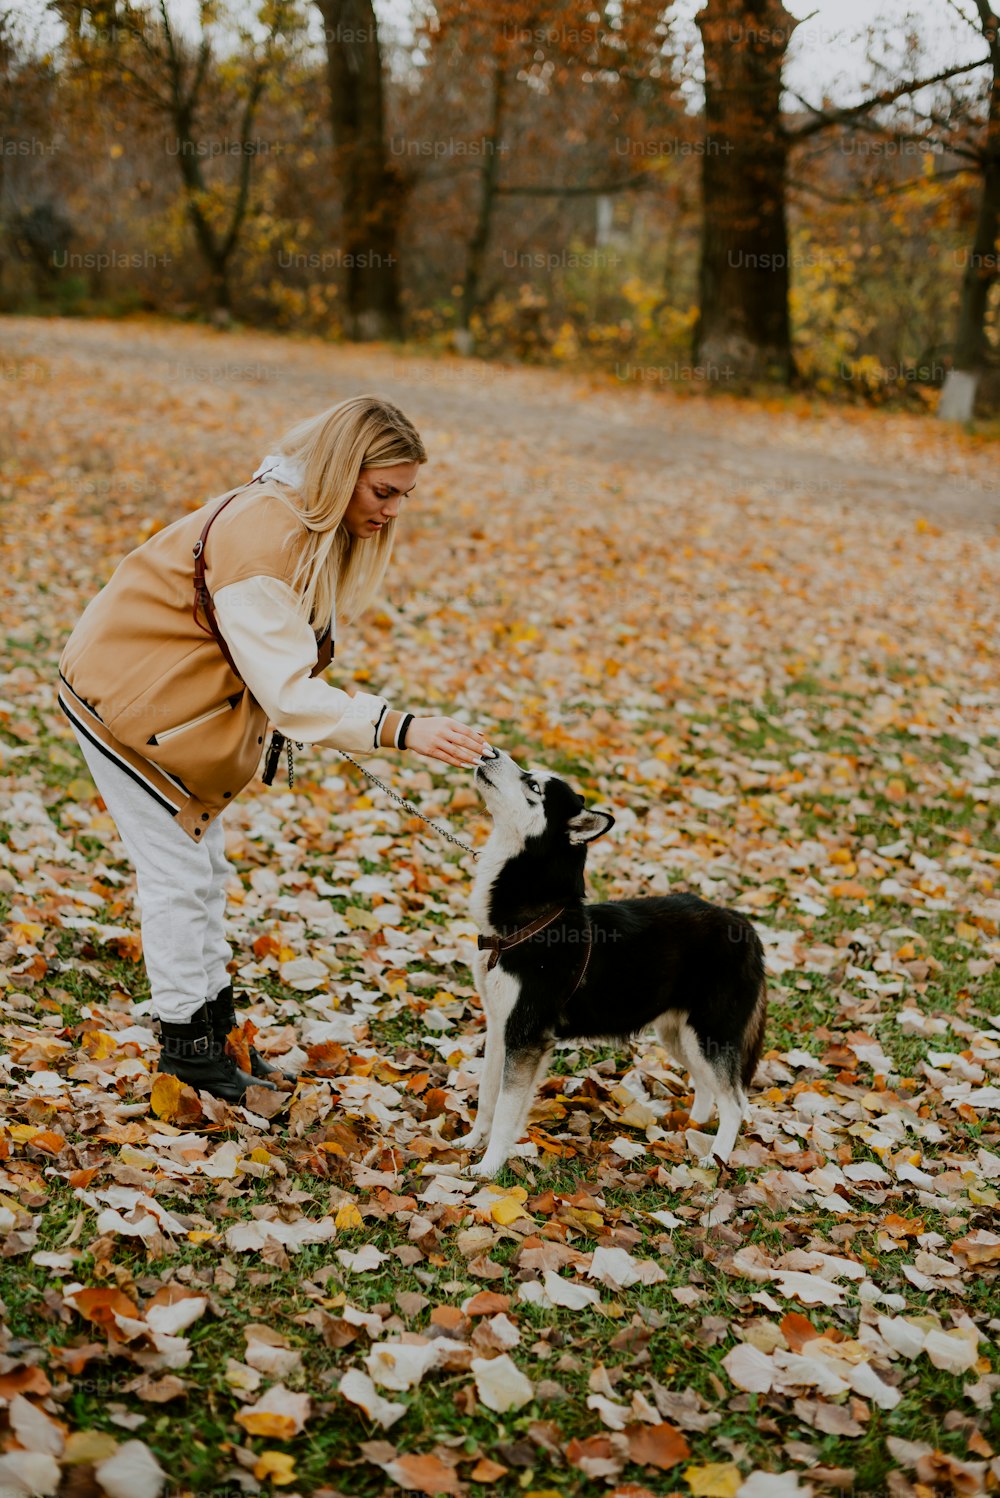 a woman is playing with a dog in the leaves